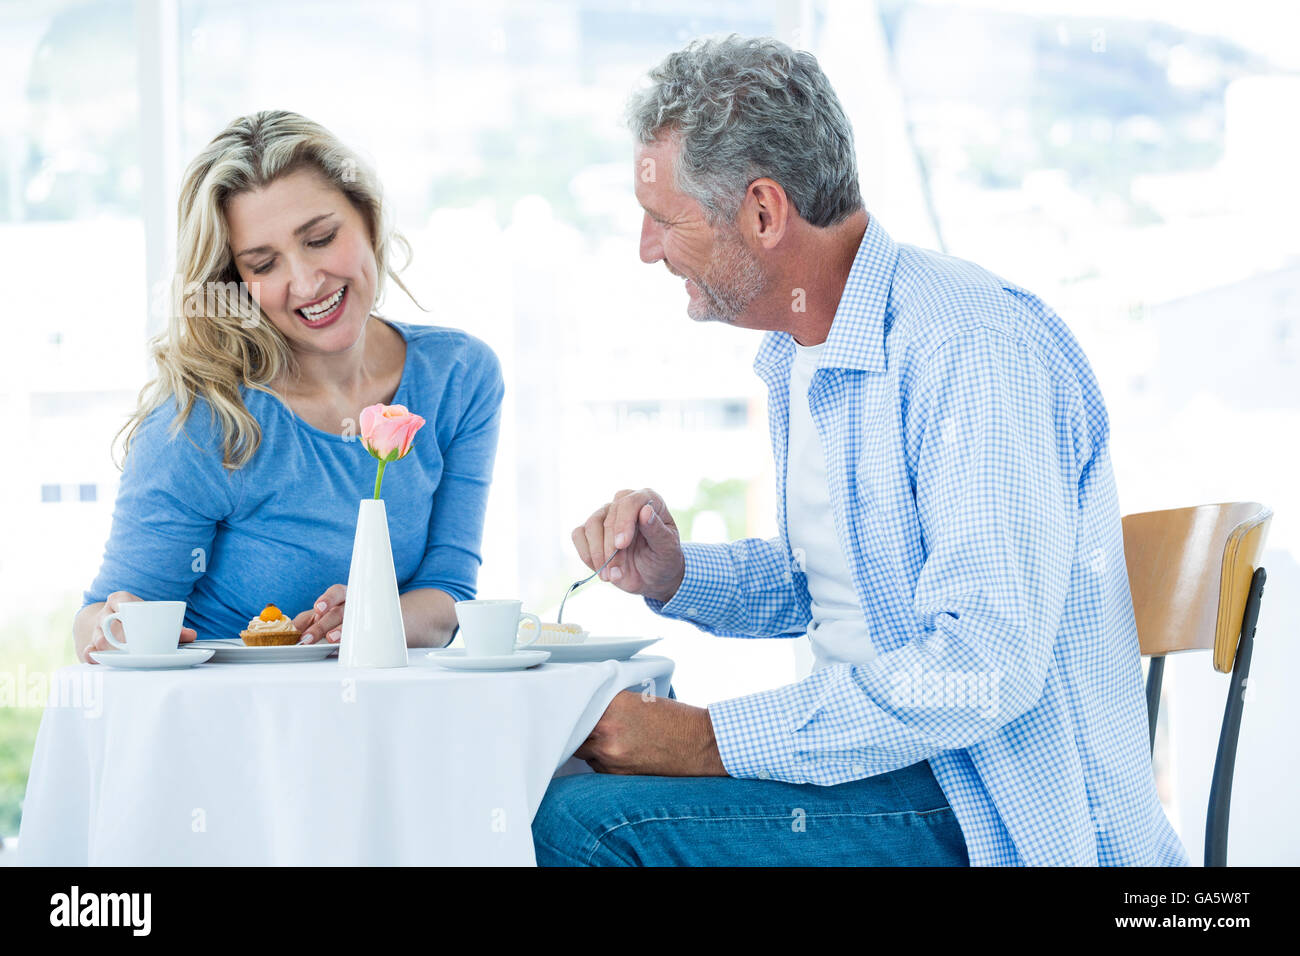 Smiling mature man looking at woman while sitting Stock Photo